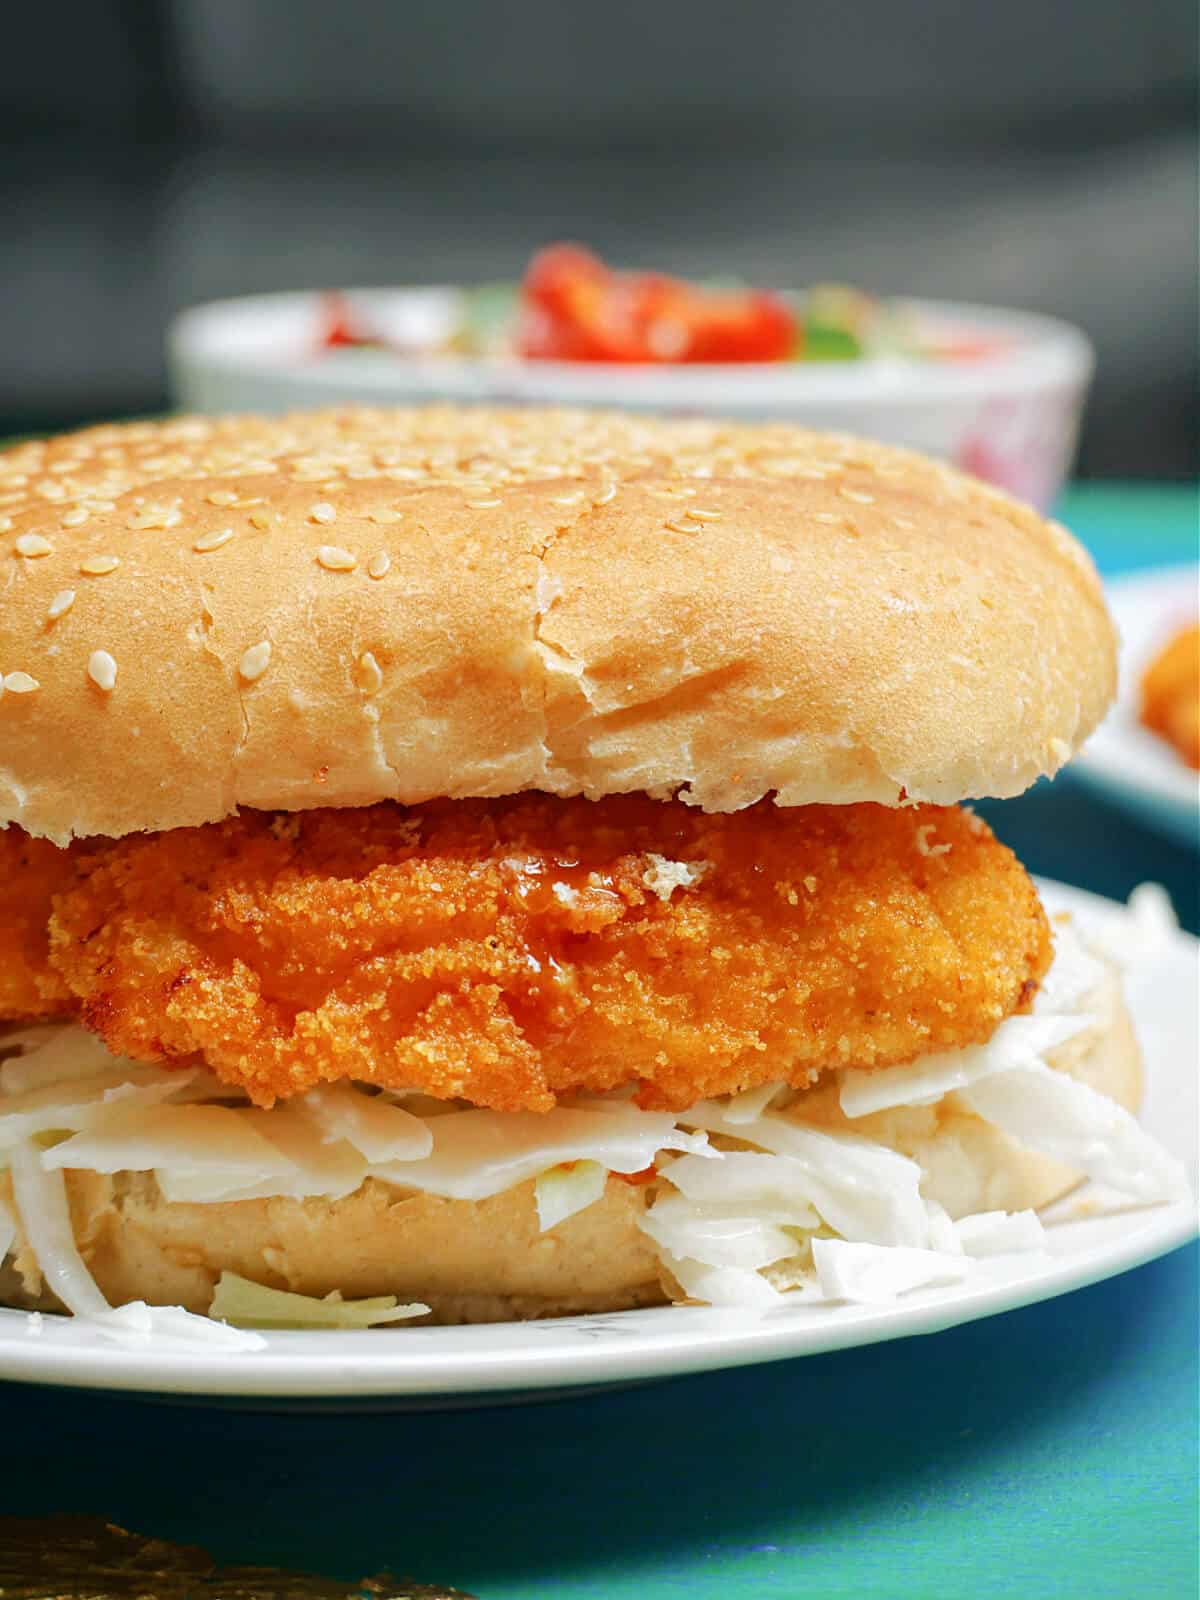 A chicken burger on a white plate.